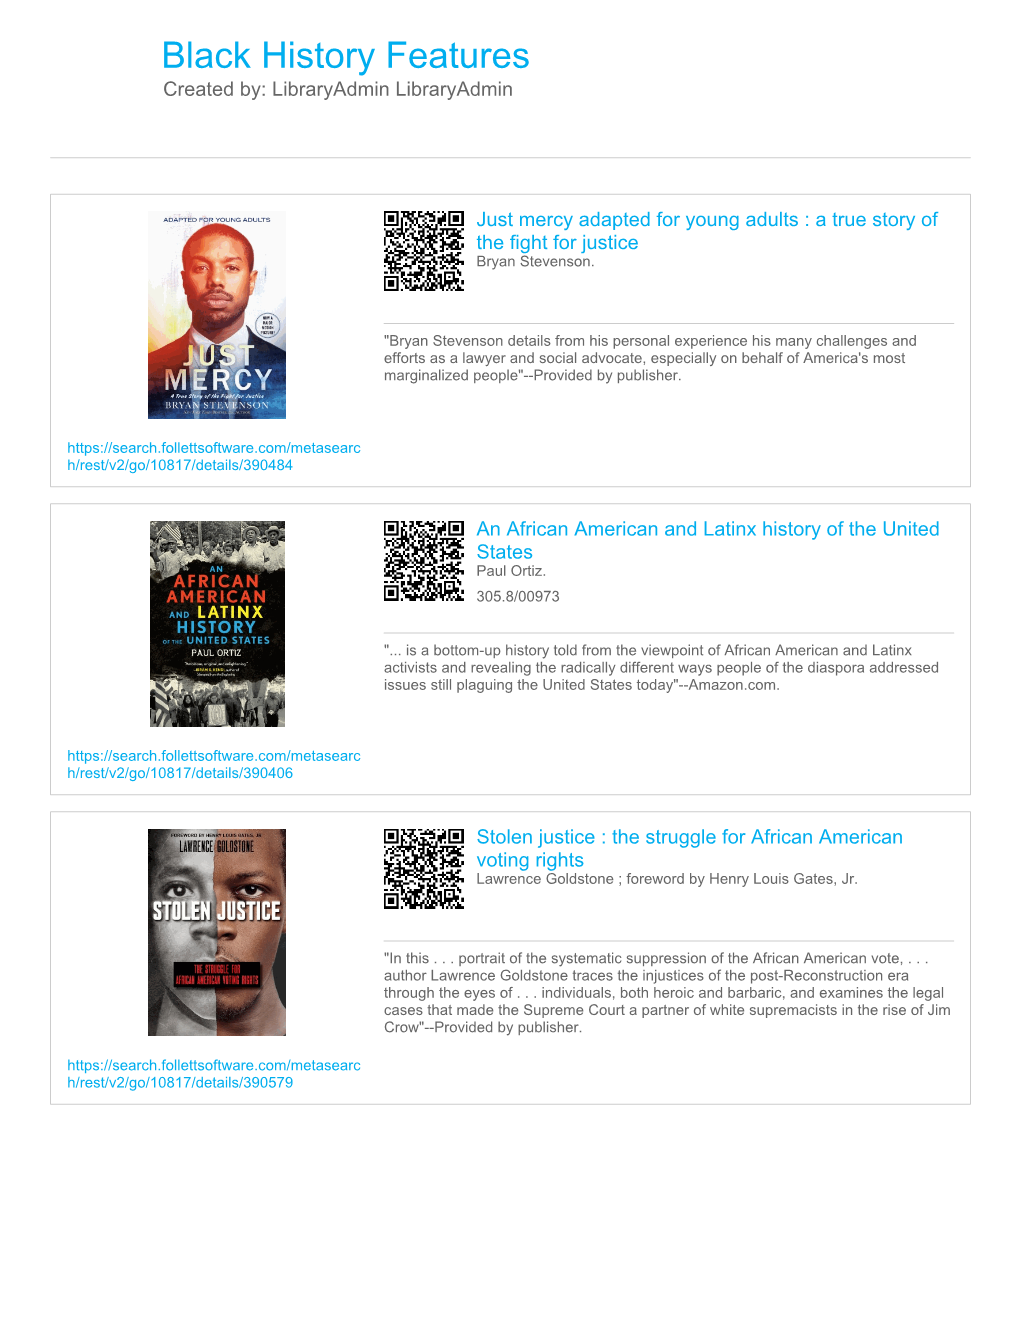 Black History Features Created By: Libraryadmin Libraryadmin